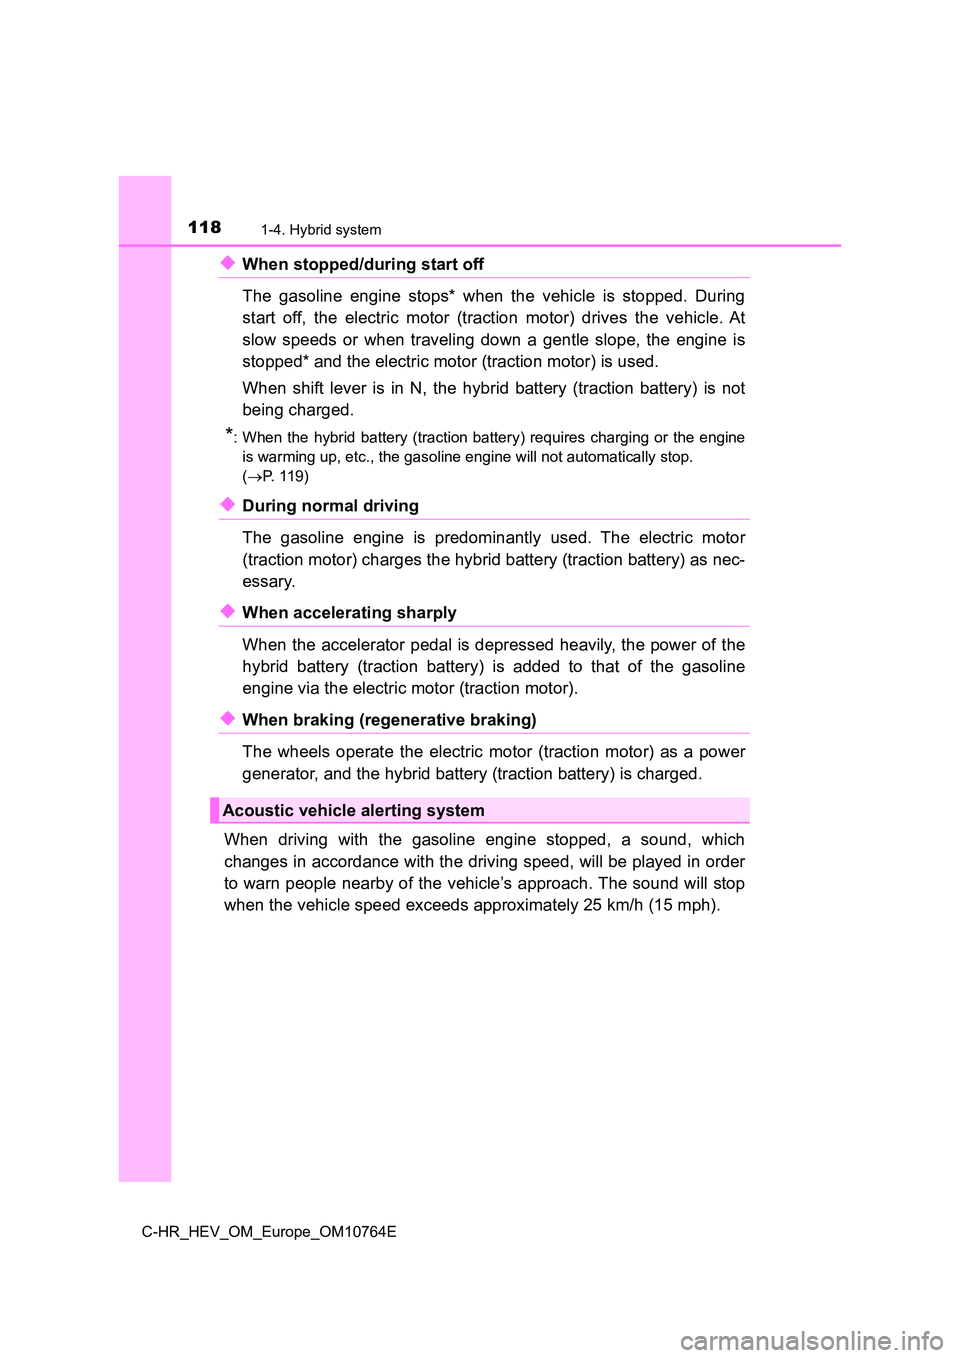 TOYOTA C-HR 2023  Owners Manual 1181-4. Hybrid system
C-HR_HEV_OM_Europe_OM10764E
◆When stopped/during start off  
The  gasoline  engine  stops*  when  the  vehicle  is  stopped.  During 
start  off,  the  electric  motor  (tracti